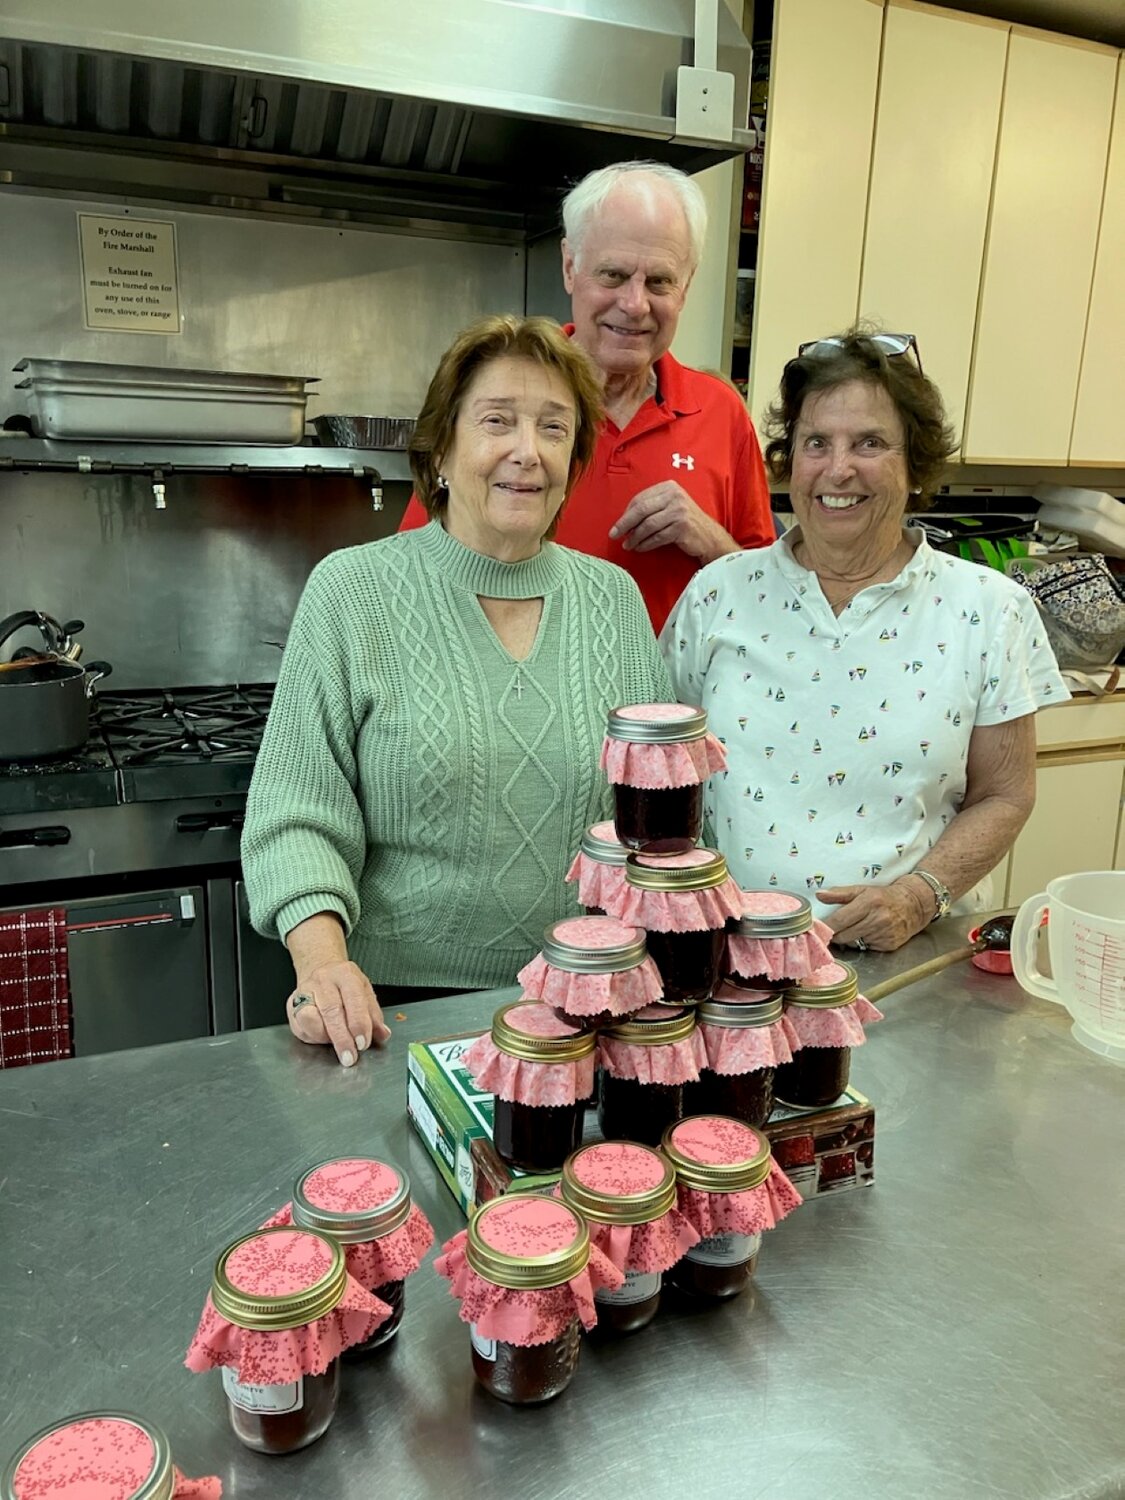 Over 30 different types of jellies will be available for purchase at the bazaar, thanks to the efforts of volunteers like Janette Heurtley, left, Nigel Hawkins and Lainry Ganzenmuller, who have spent the last seven months making them.